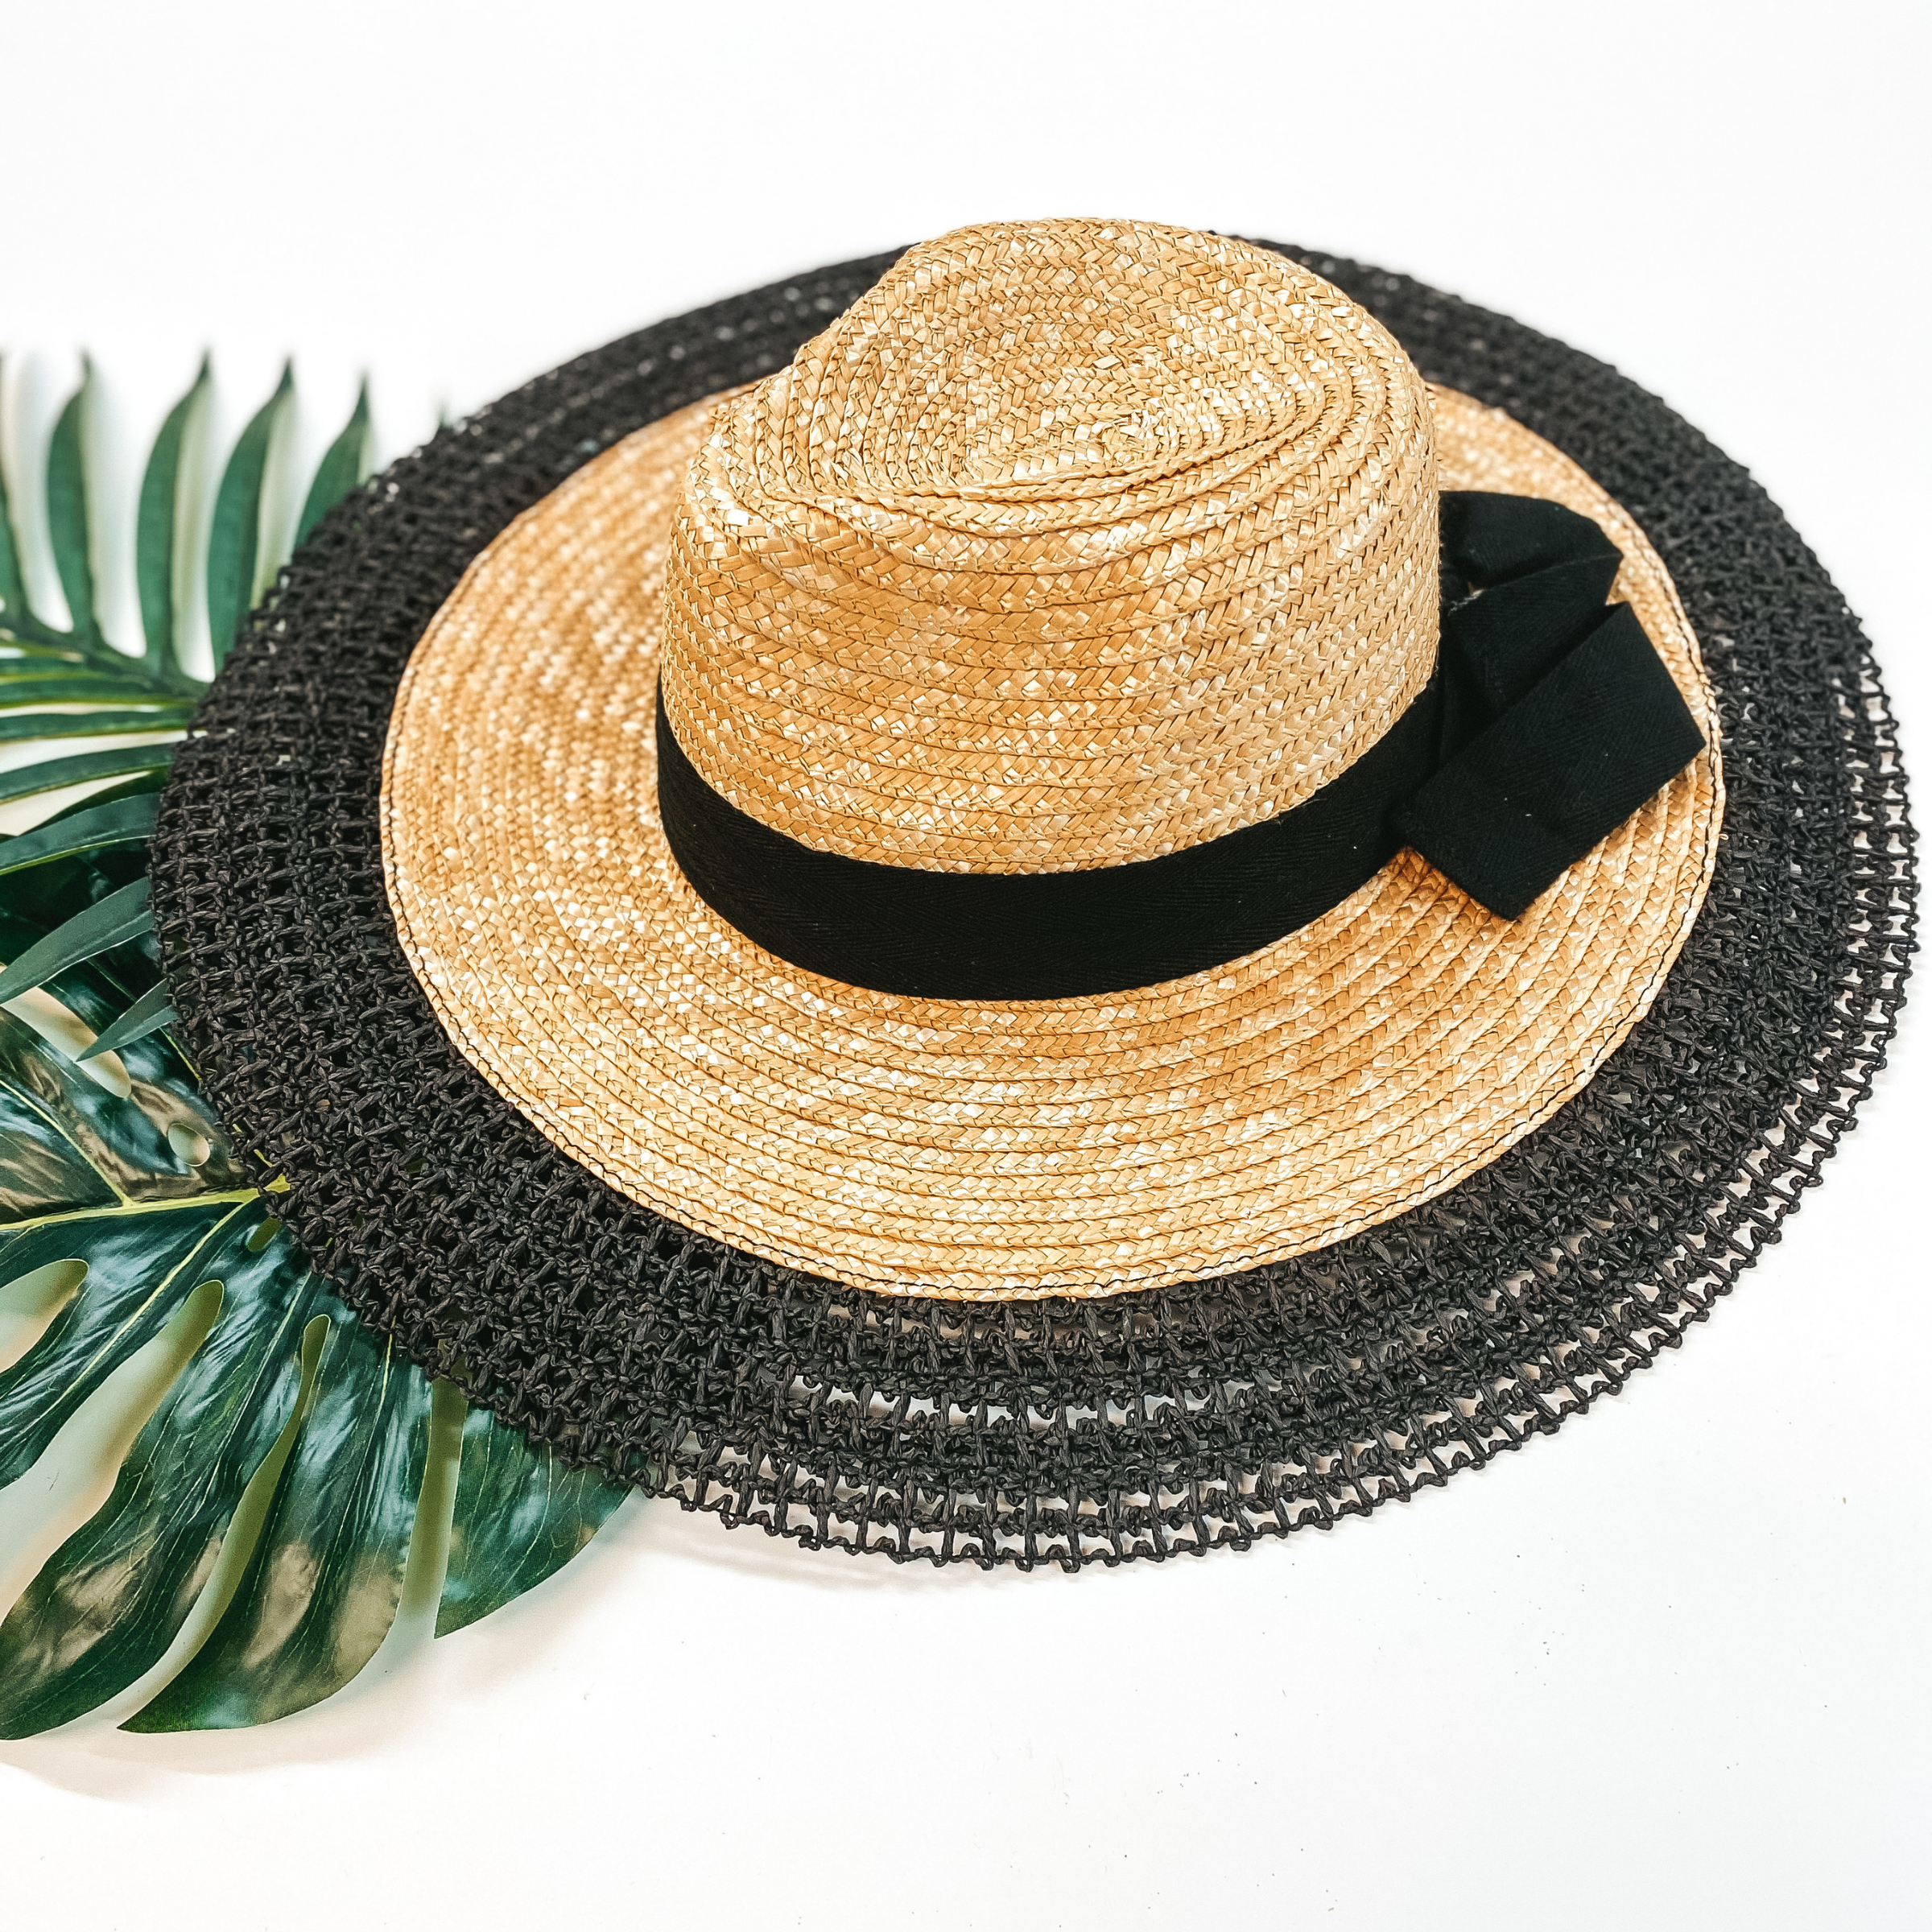 Sun Daze Wide Brim Hat with Black Band and Bow in Natural Tan and Black - Giddy Up Glamour Boutique